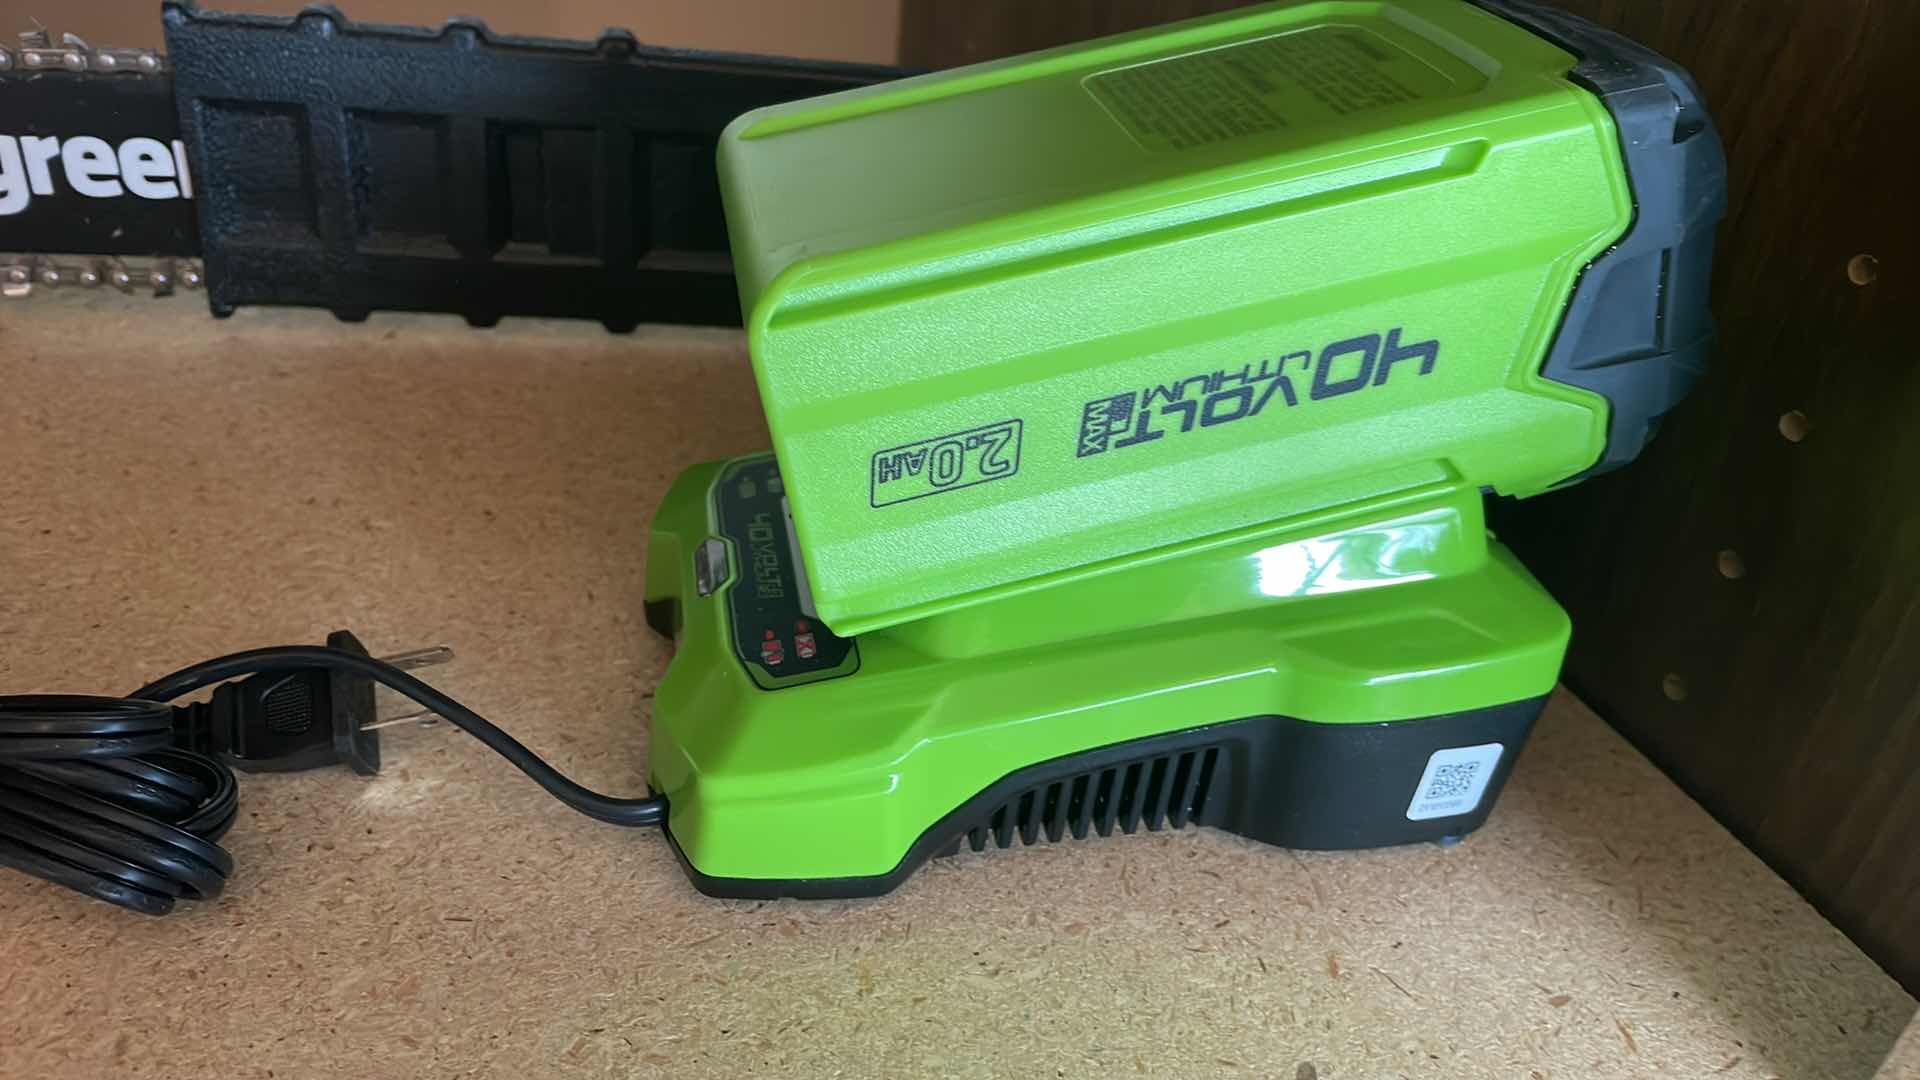 Photo 2 of GREEN WORKS 40v CHAINSAW 12” WITH BATTERY AND CHARGER